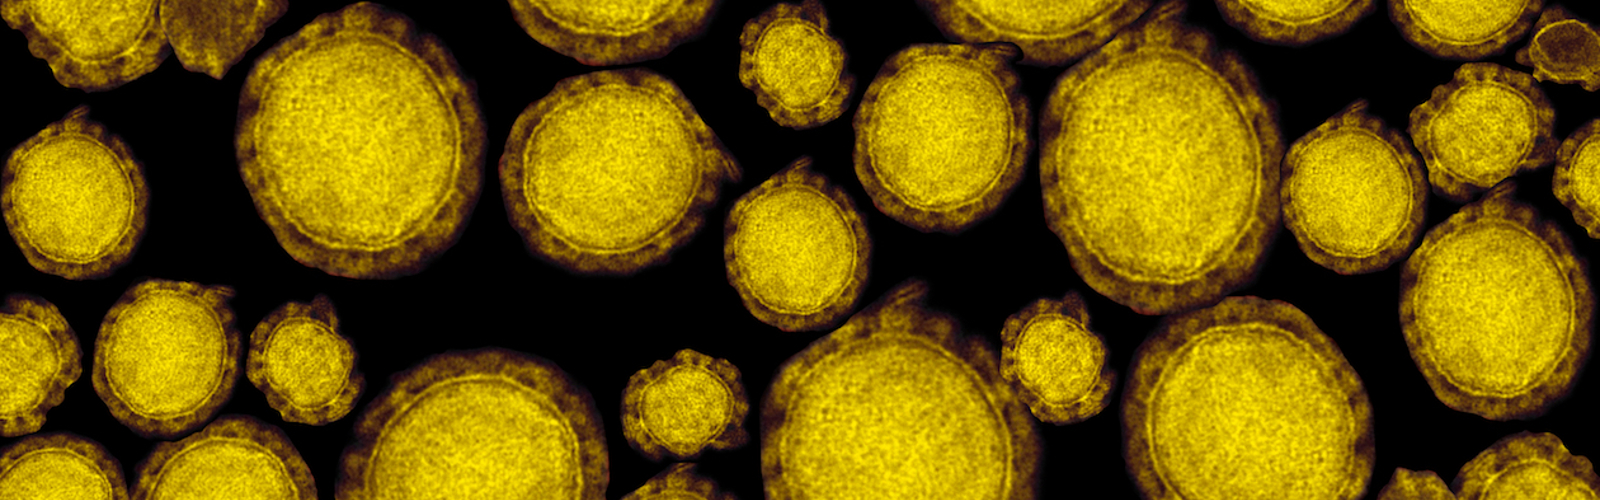 Detail of ultraestructure of deadly coronavirus particles under transmission electron microscopy